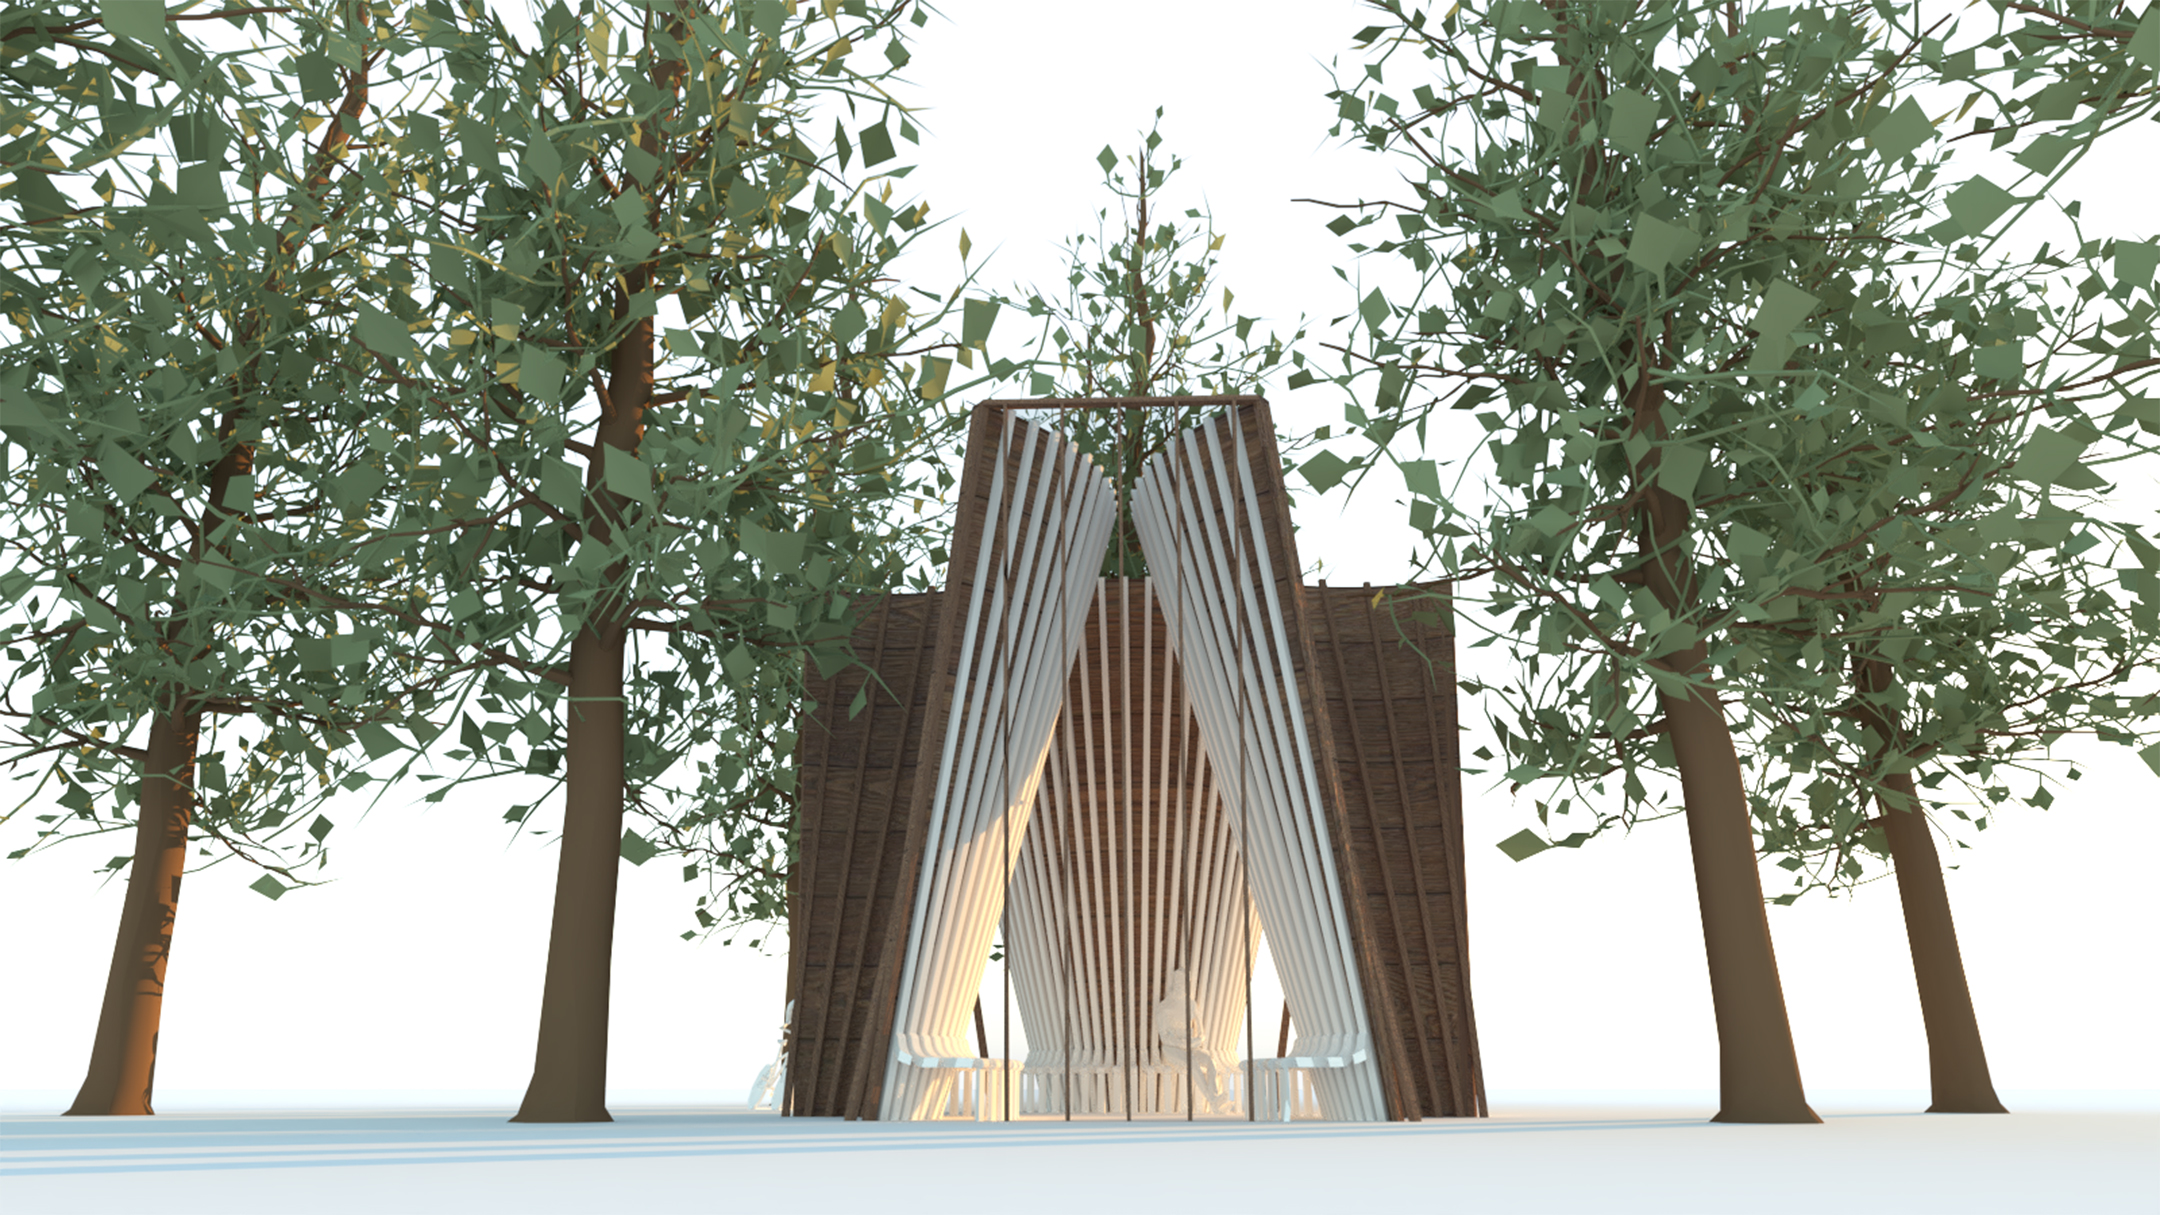 Digital architectural rendering of a triangular building surrounded by trees